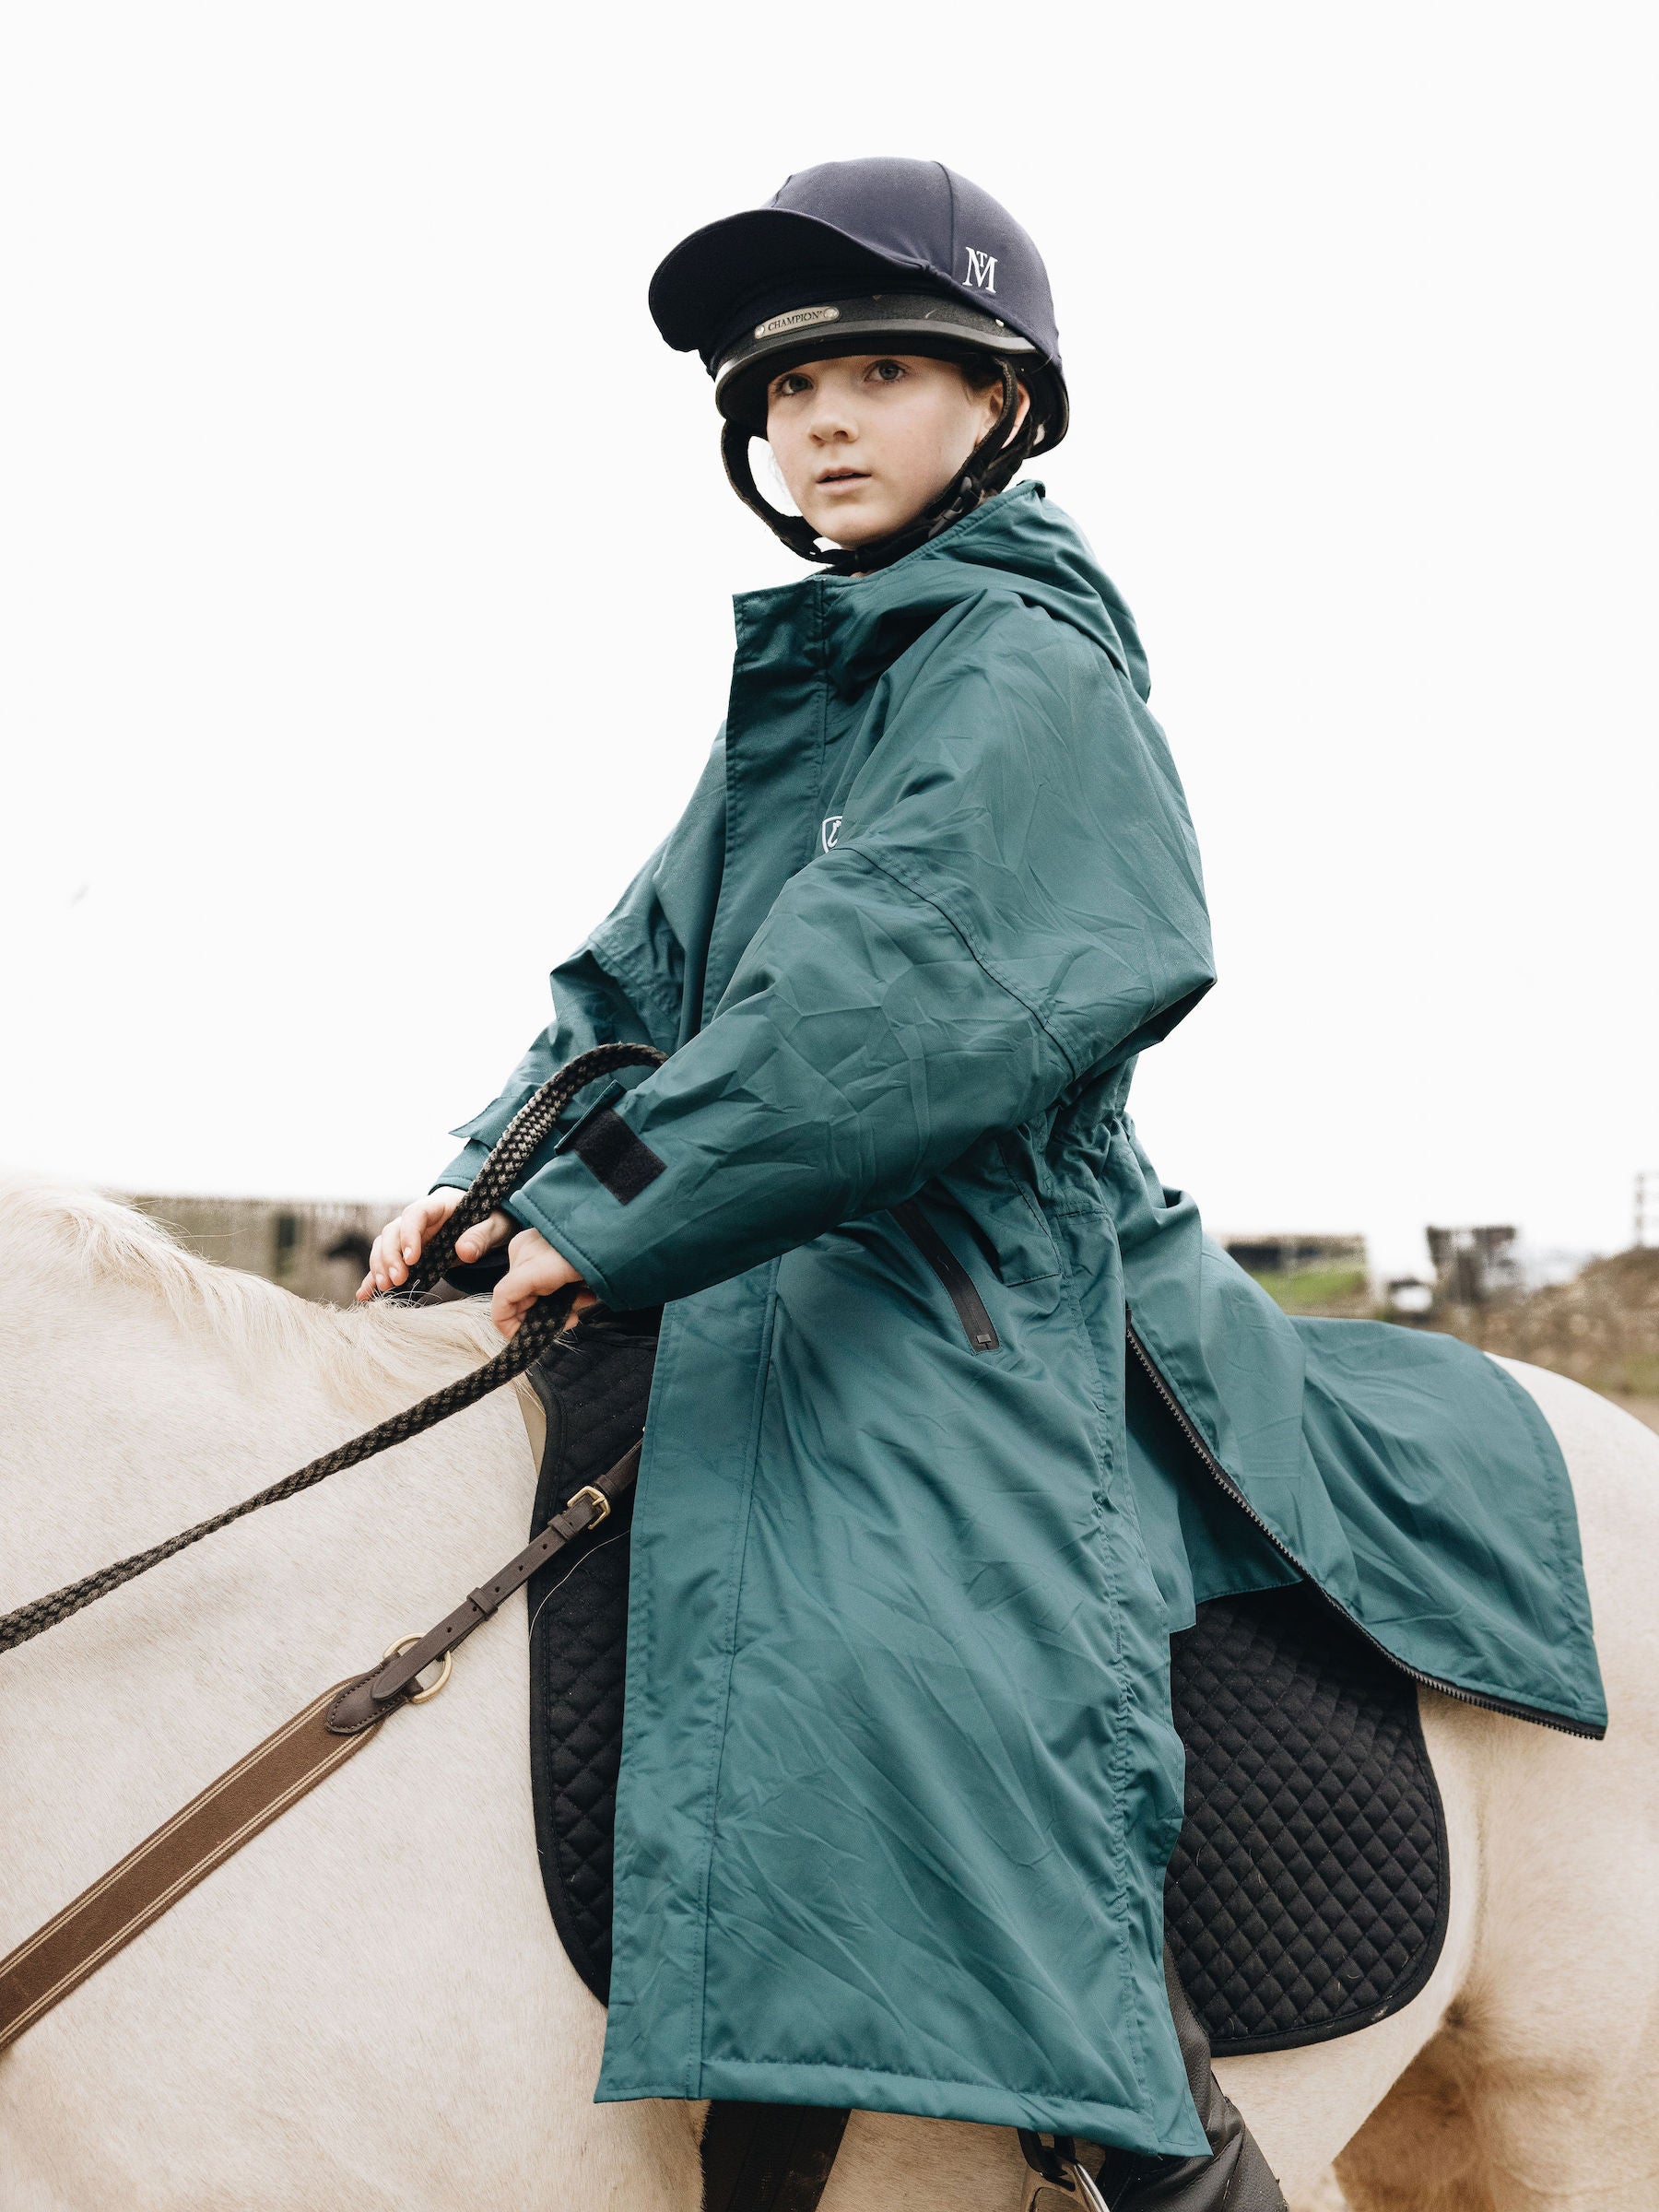  Teal EQUIDRY Equestrian oversized waterproof  Coat with side zips modelled by child riding pony  